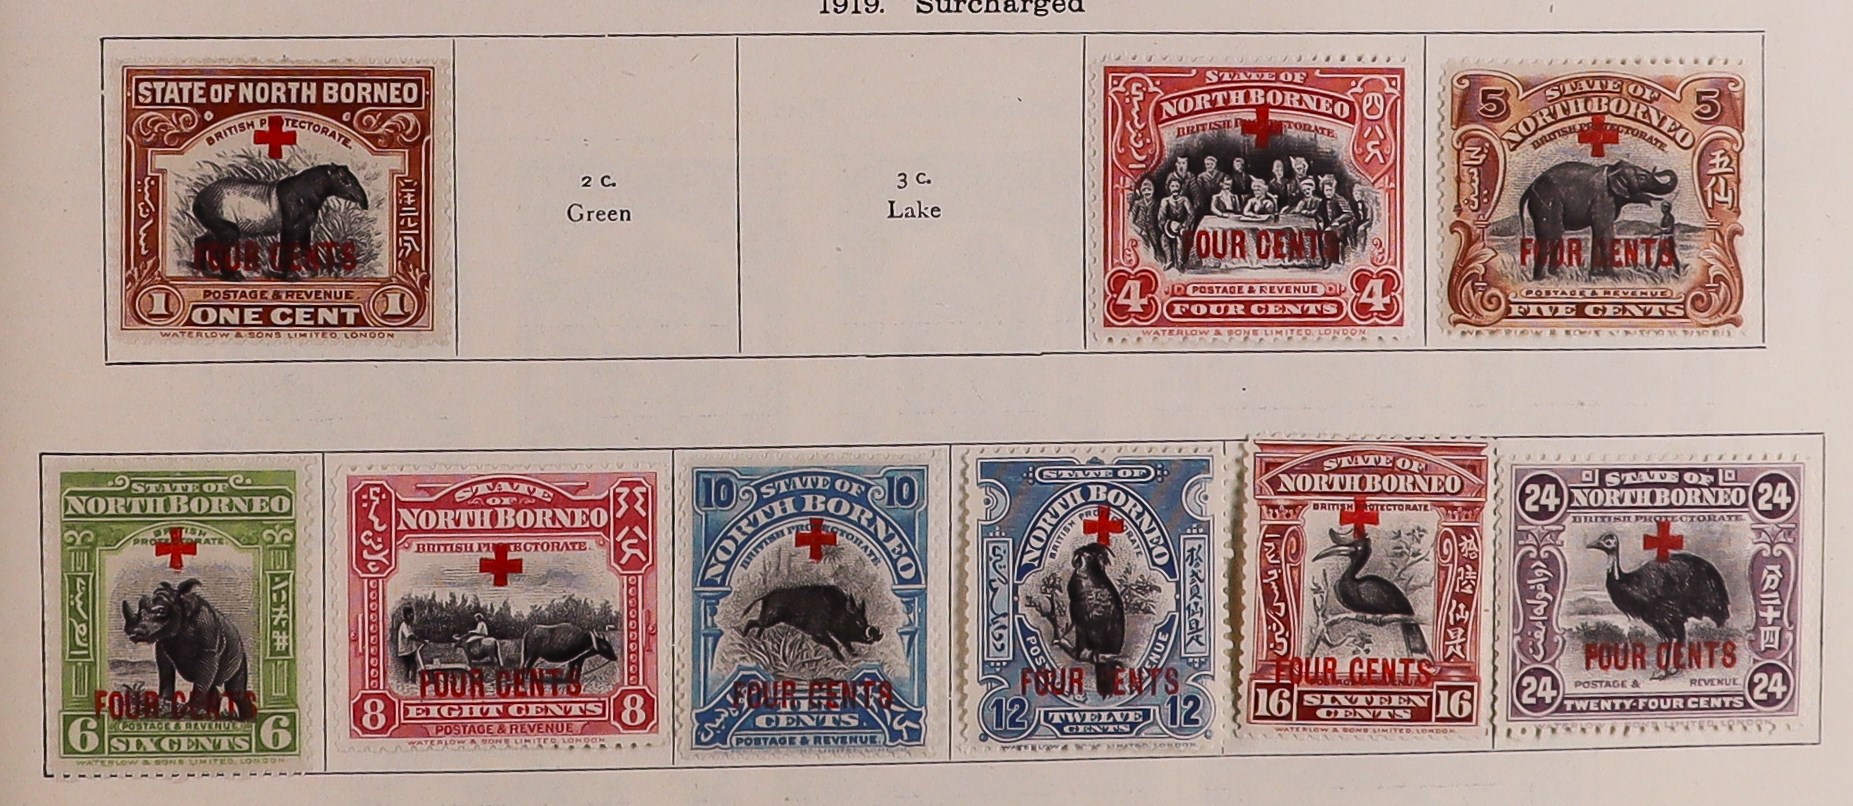 COLLECTIONS & ACCUMULATIONS BR. EMPIRE IN SG "IDEAL" ALBUM. Volume 1 for Br. Empire stamps to mid- - Image 10 of 10